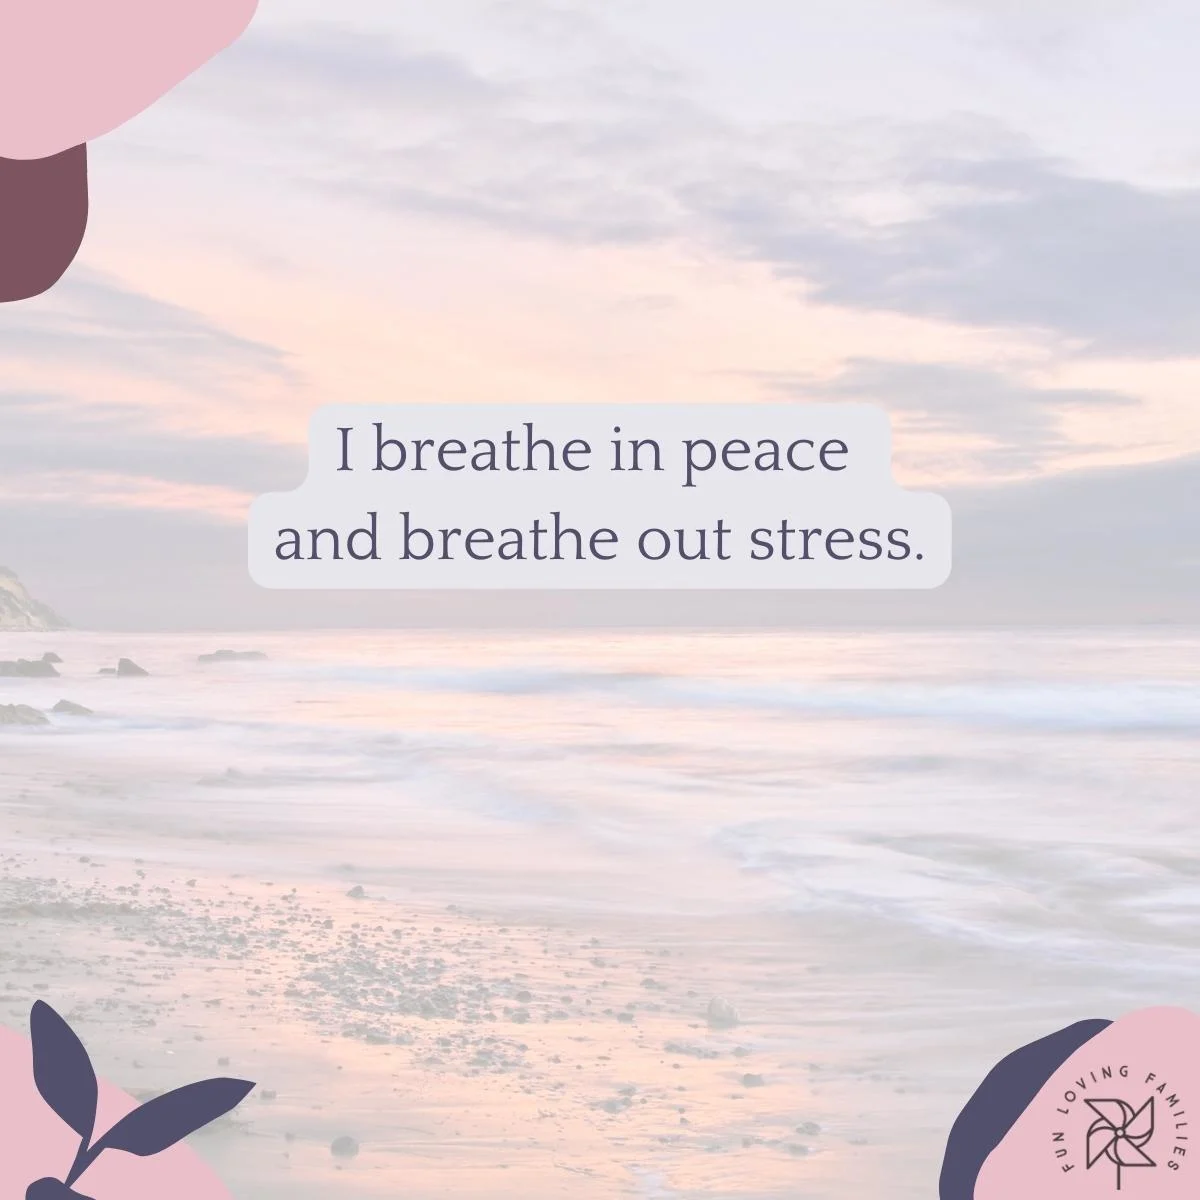 I breathe in peace and breathe out stress affirmation